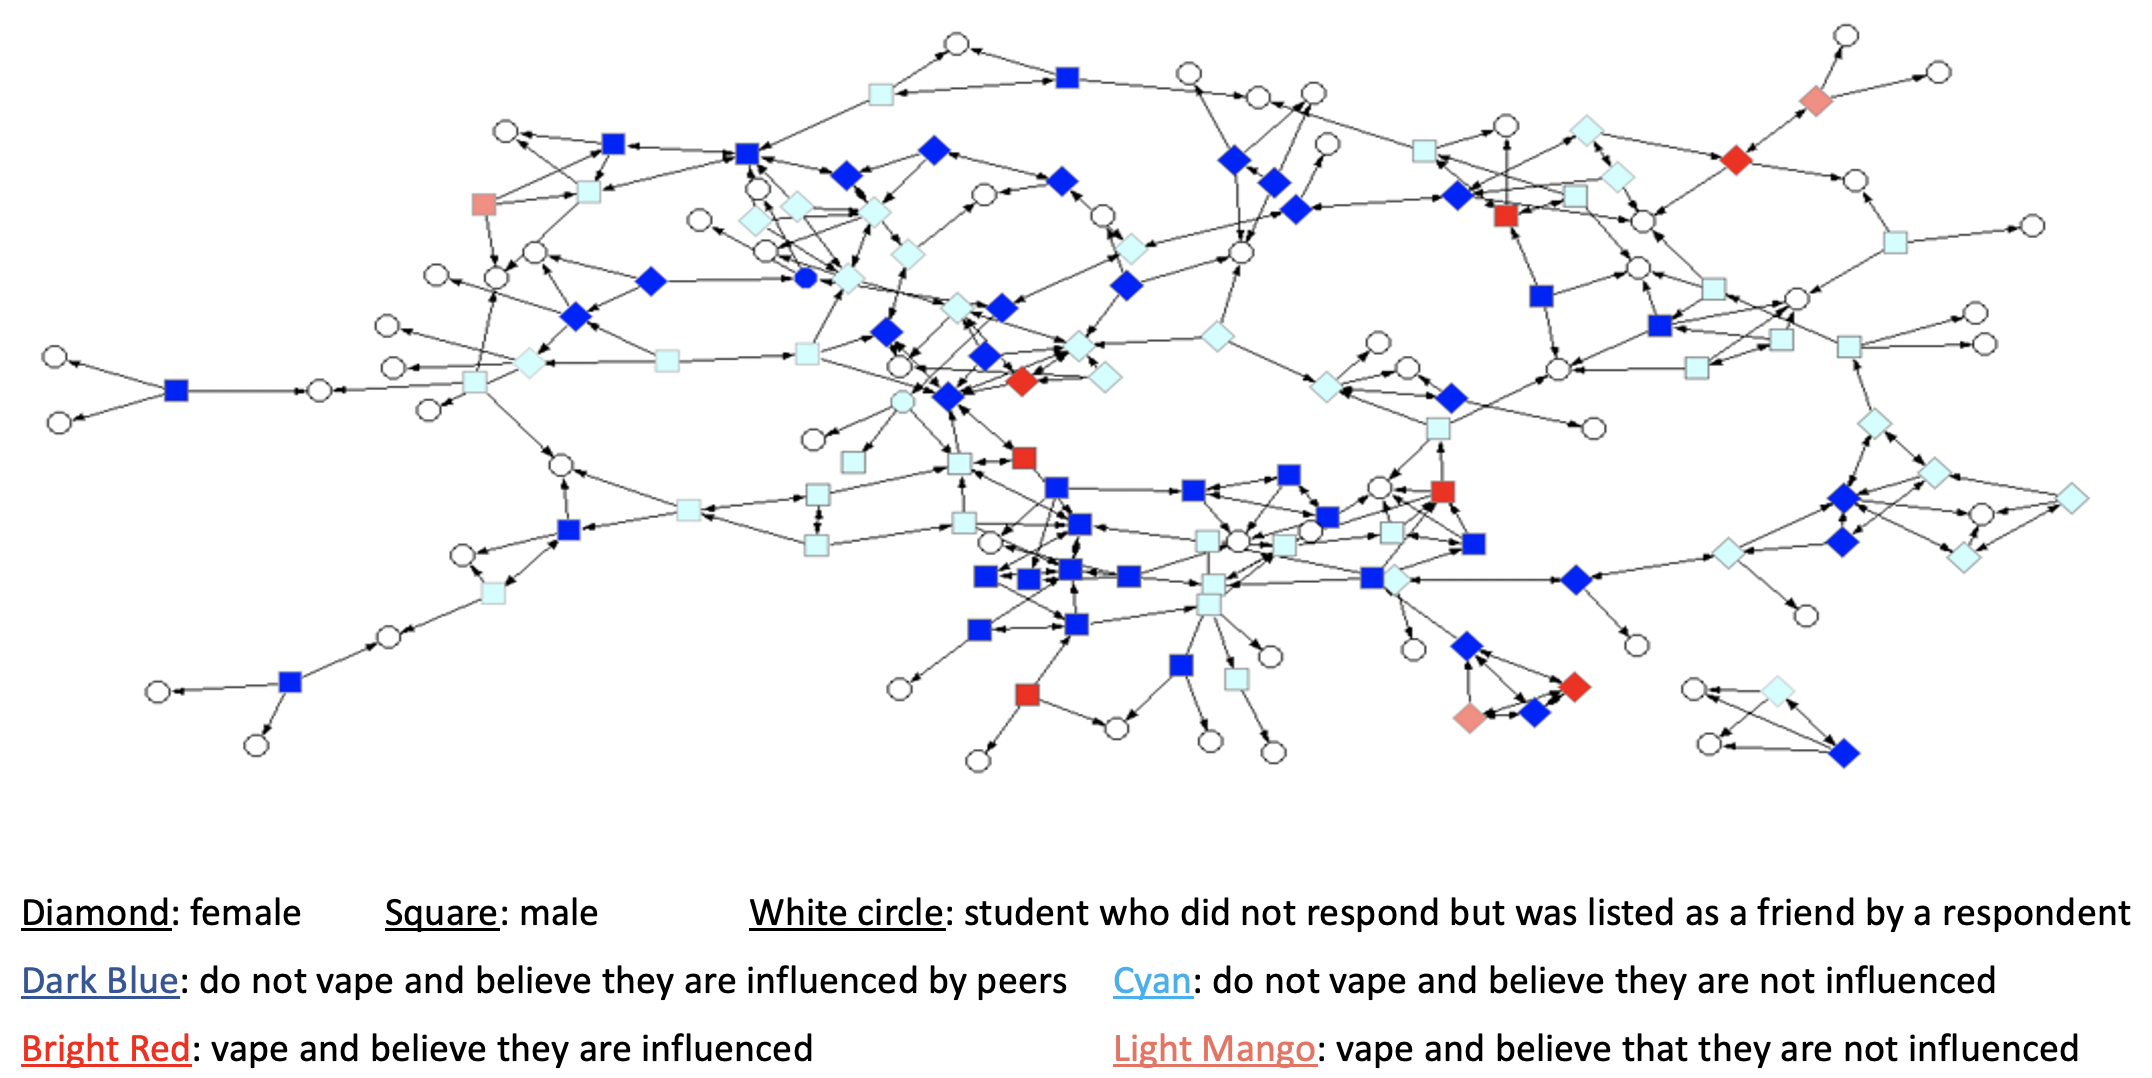 Network Graph With Arrows Between Nodes Representing High School Students and Their Friends Colored in Blue if They Do Not Vape and Red if They Do Vape